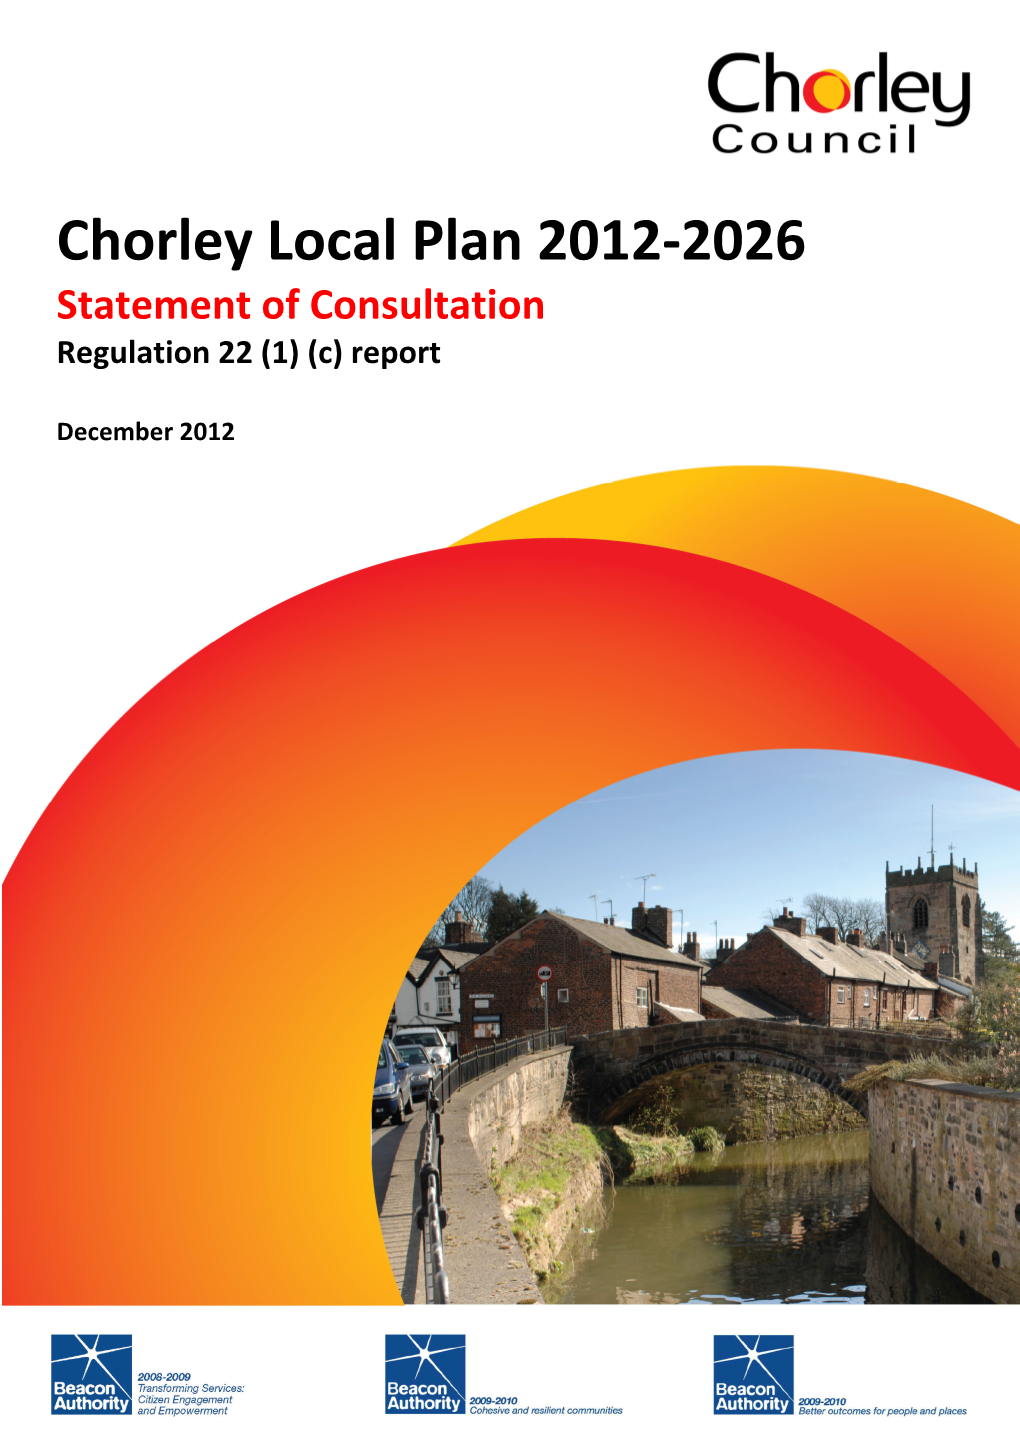 Chorley Local Plan 2012-2026 (Previously Referred to As the Site Allocations and Development Management Policies Development Plan Document)